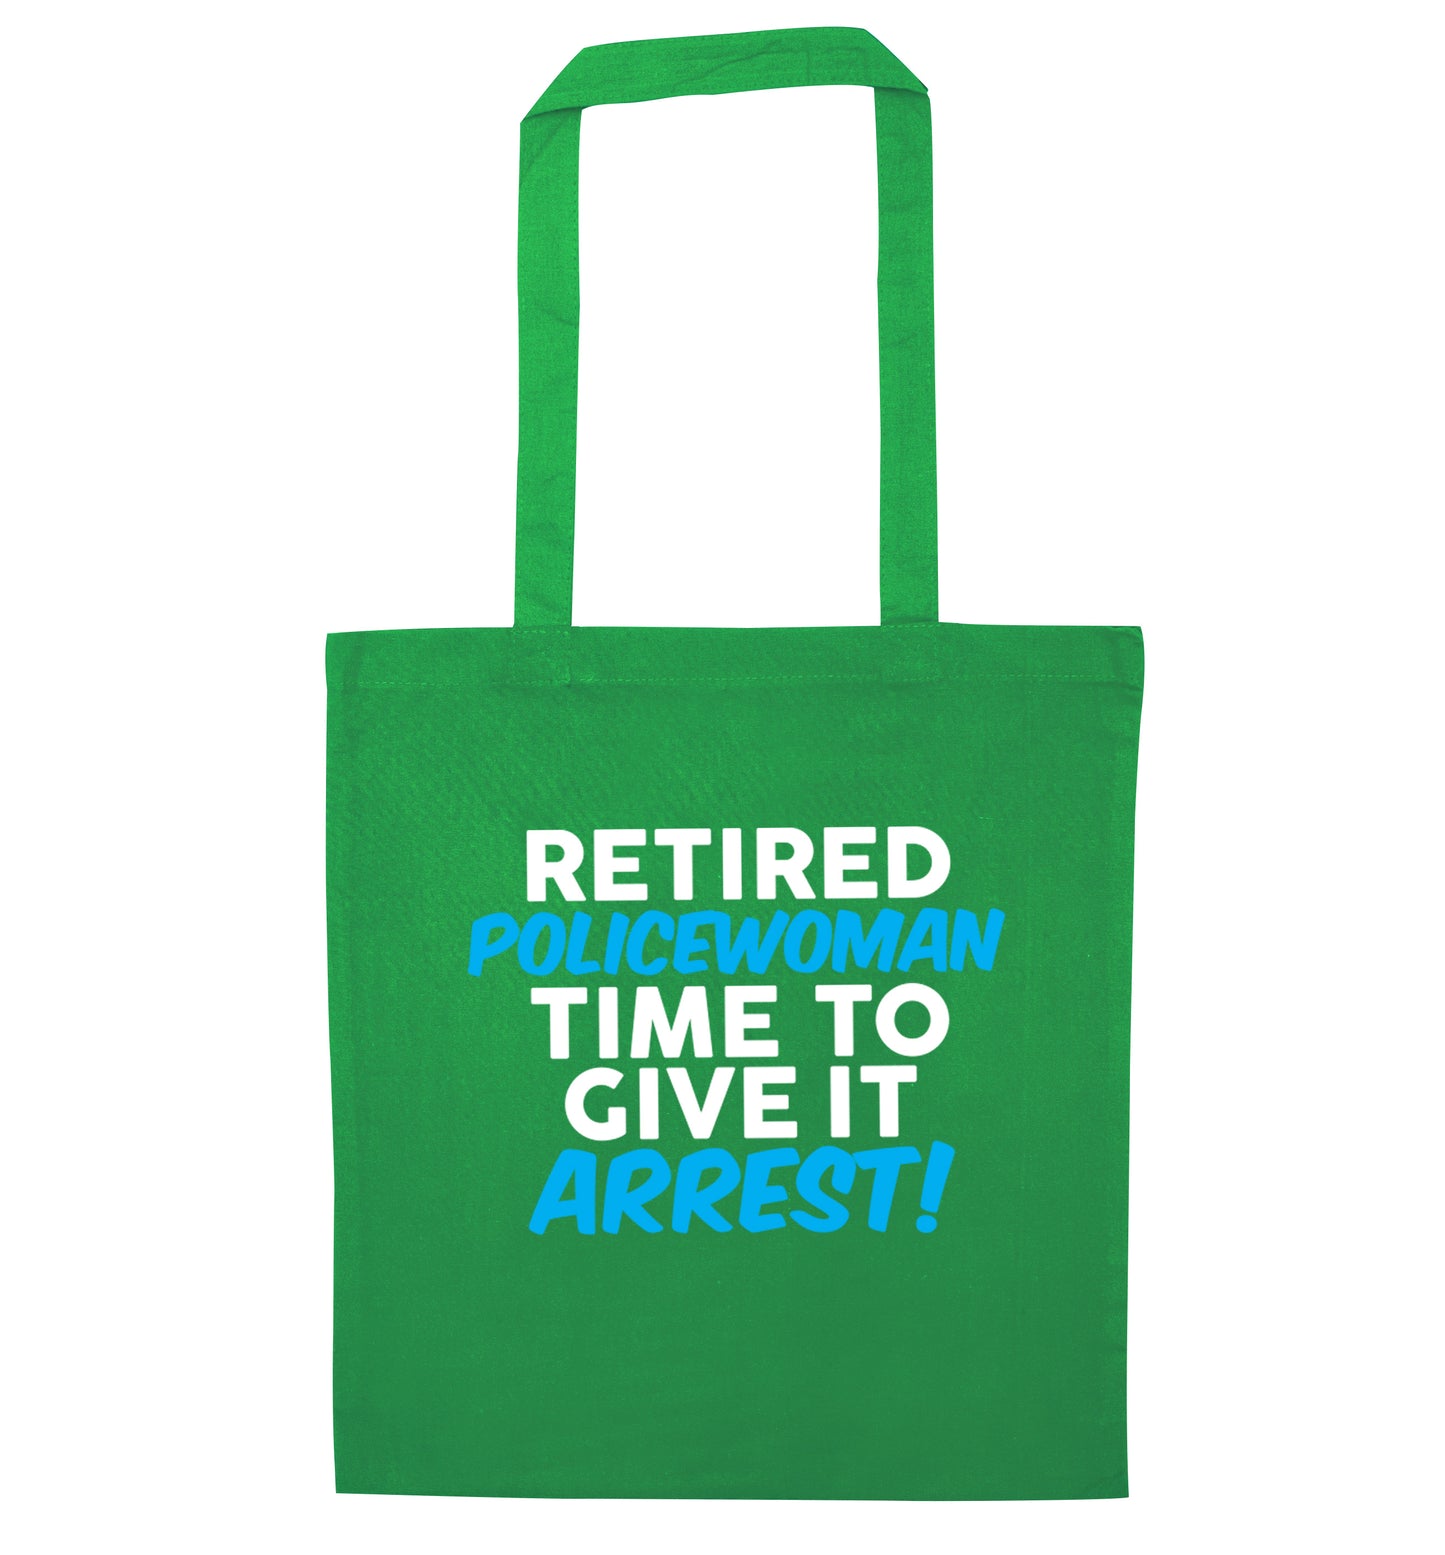 Retired policewoman time to give it arrest green tote bag